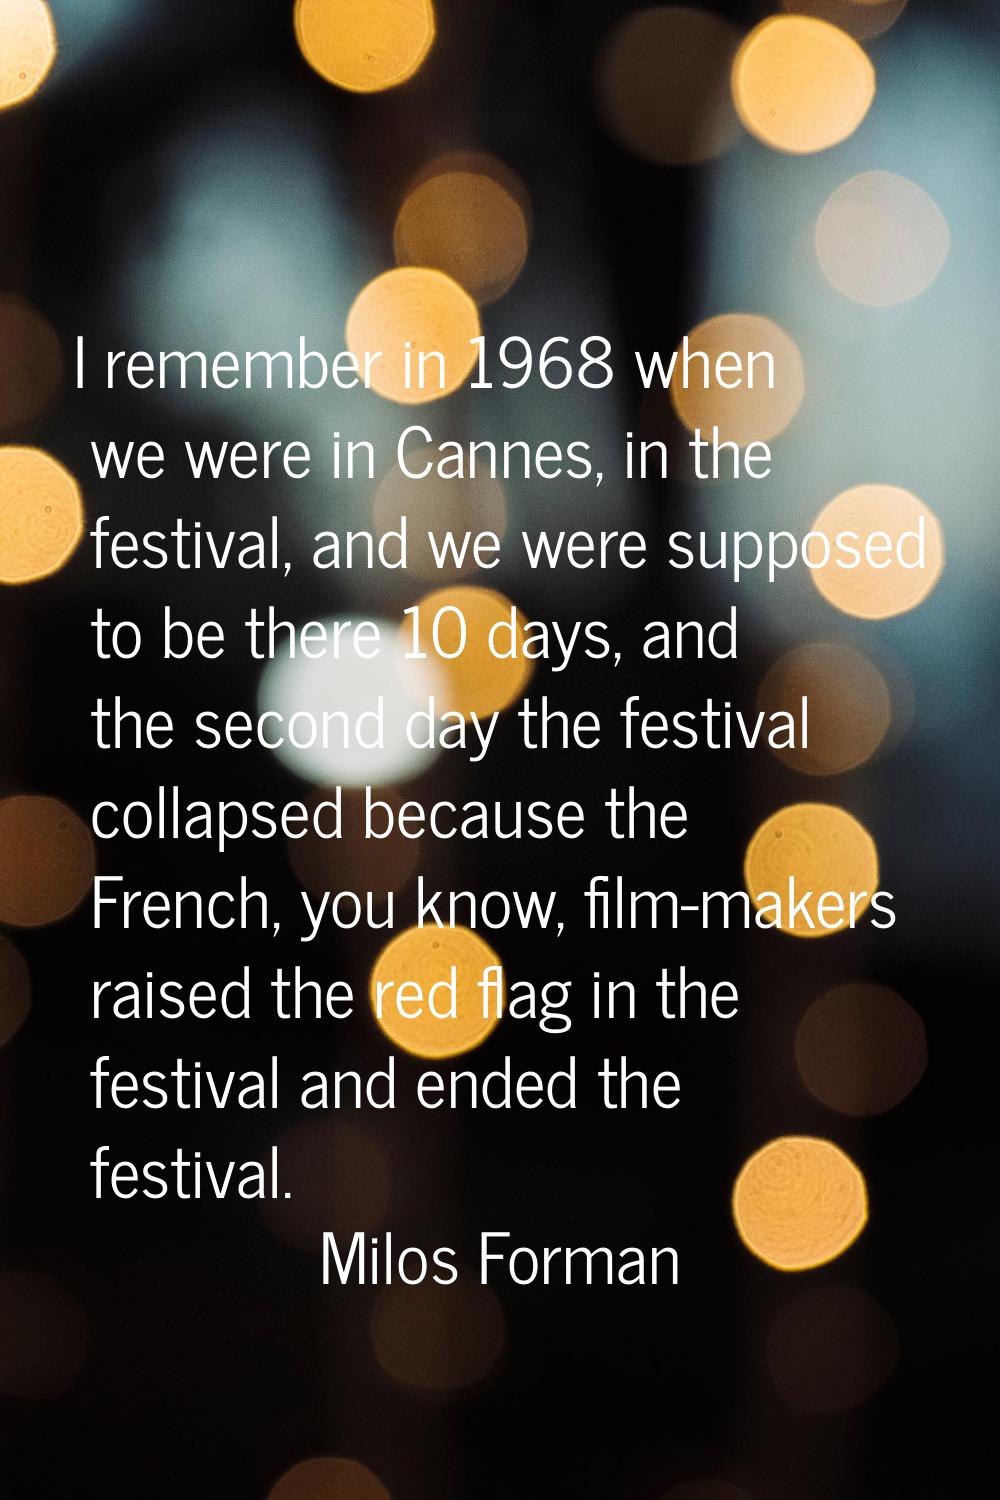 I remember in 1968 when we were in Cannes, in the festival, and we were supposed to be there 10 day